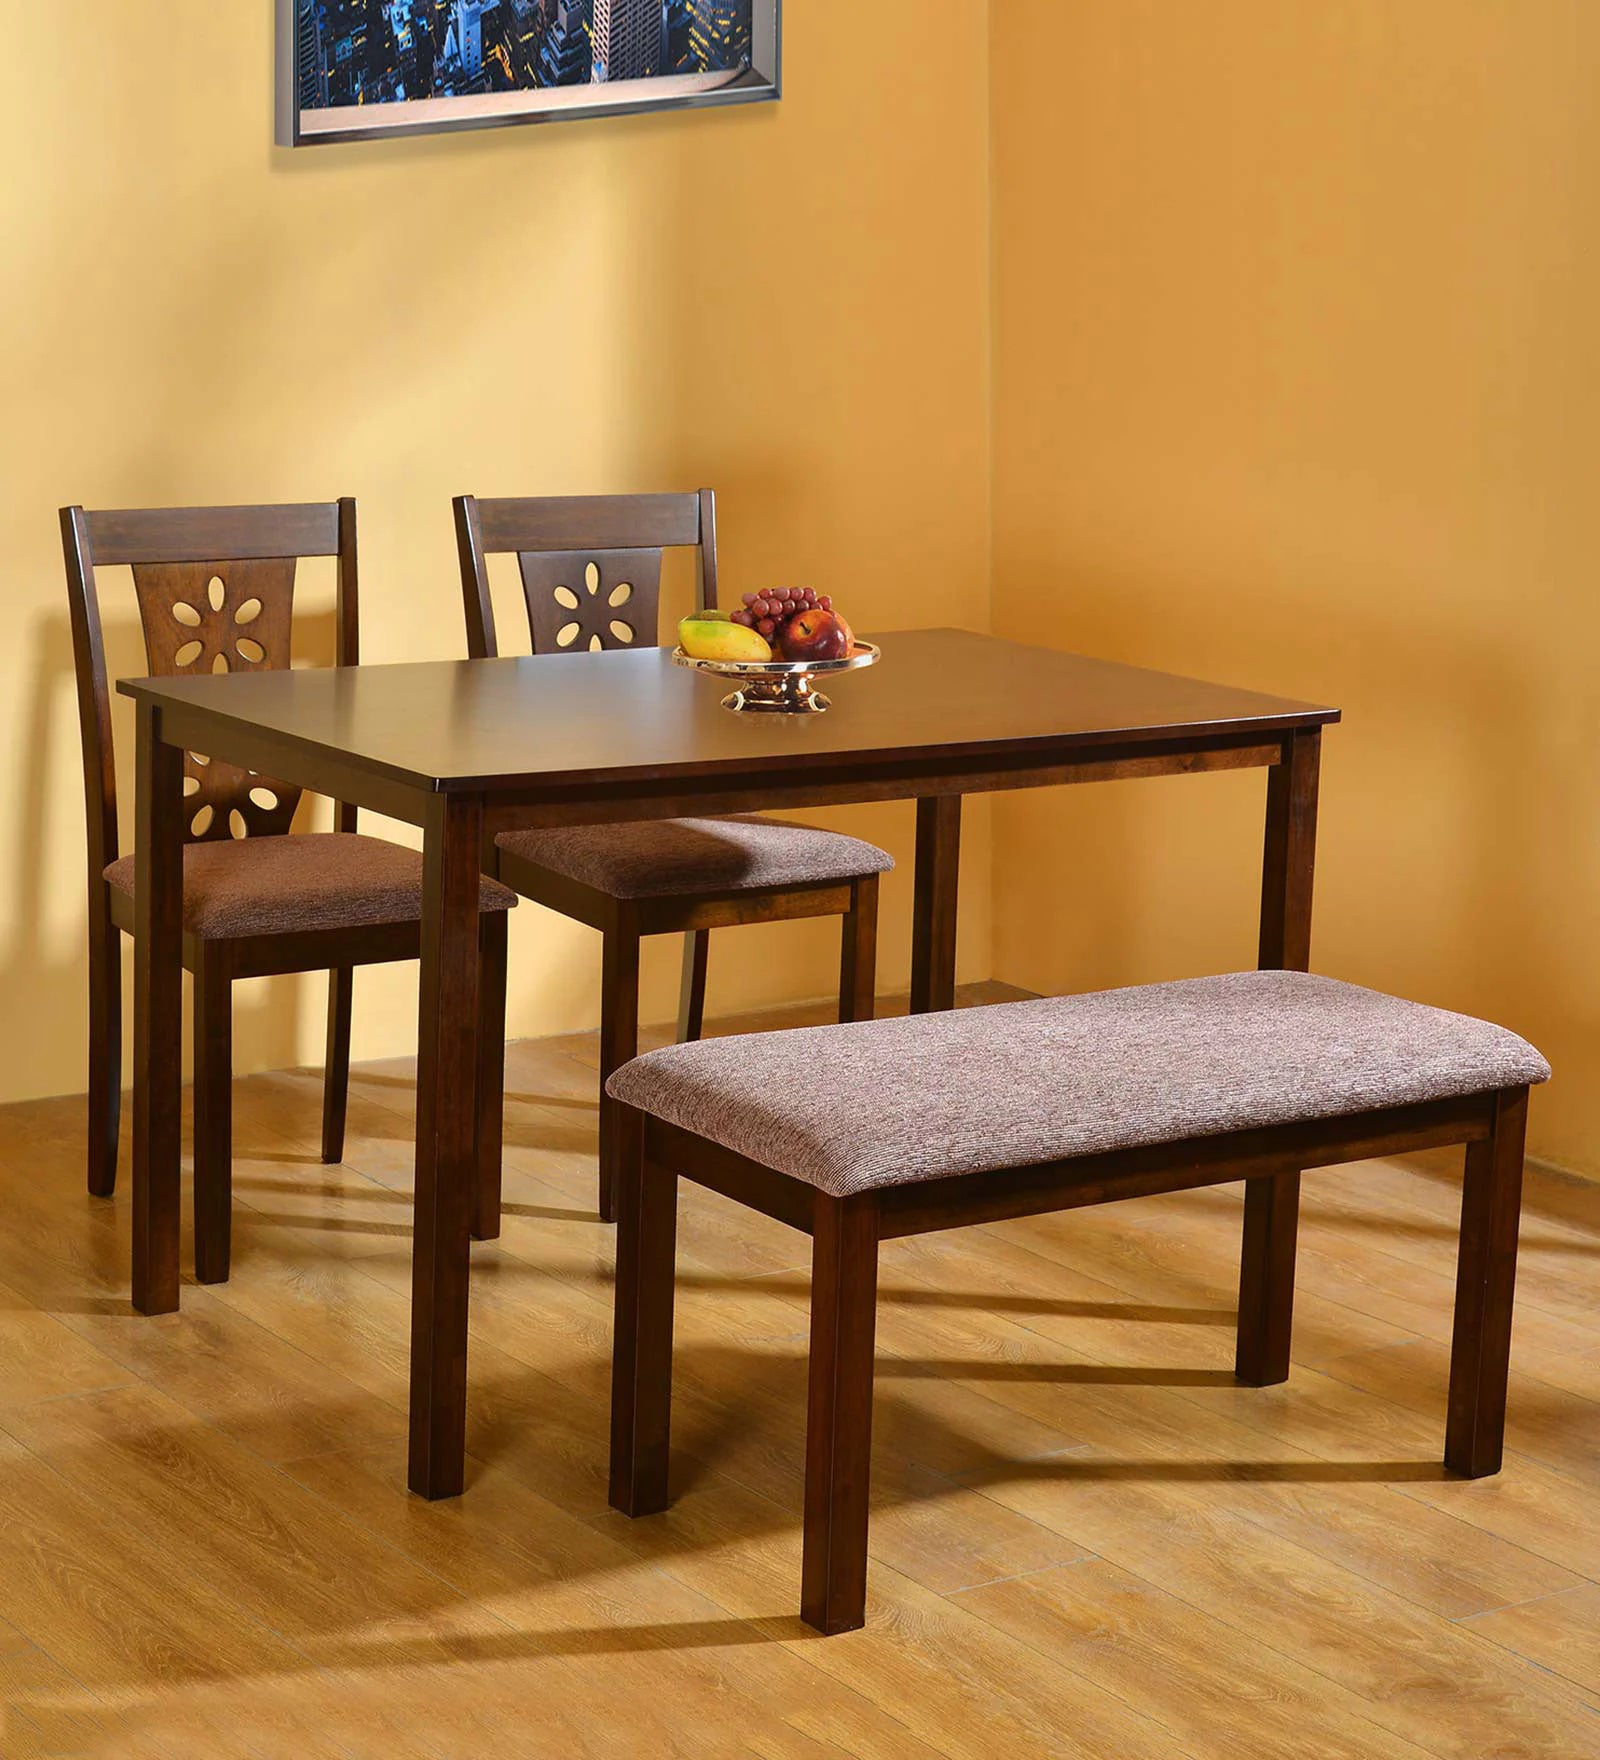 Sutlej 4 Seater Dining Set in Antique Cherry Finish with Bench